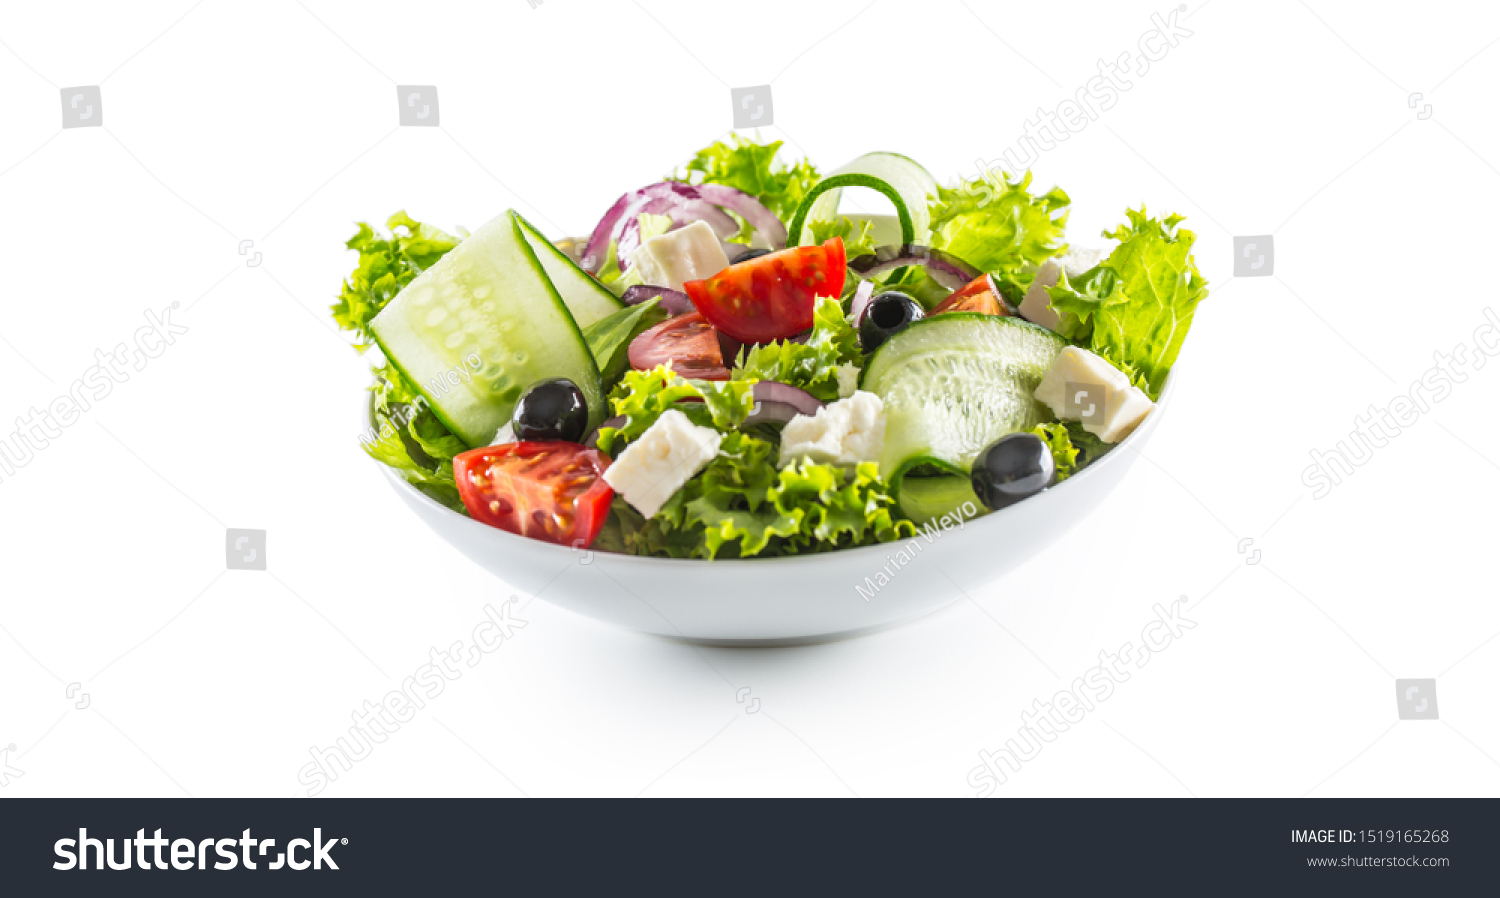 Salad with fresh vegetables olives tomatoes red onion greek cheese feta and olive oil isolated on white background. #1519165268